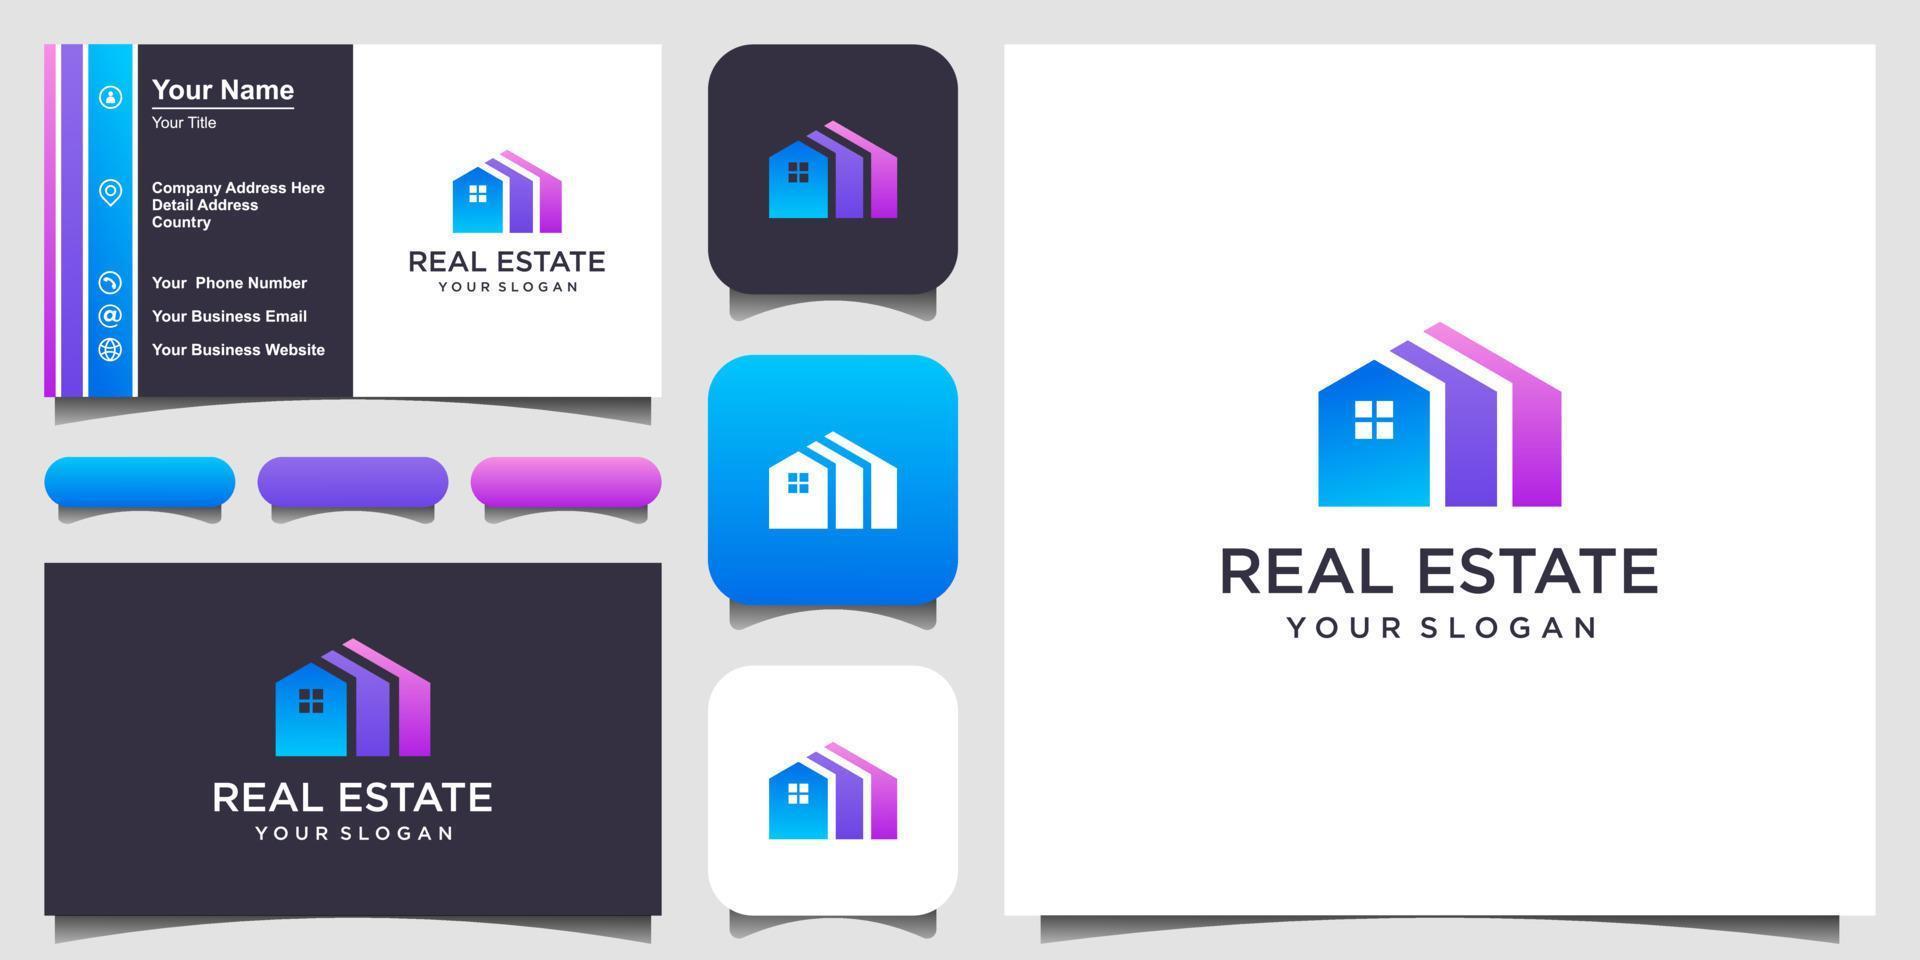 real estate construction logo design Inspiration. icon and business card vector